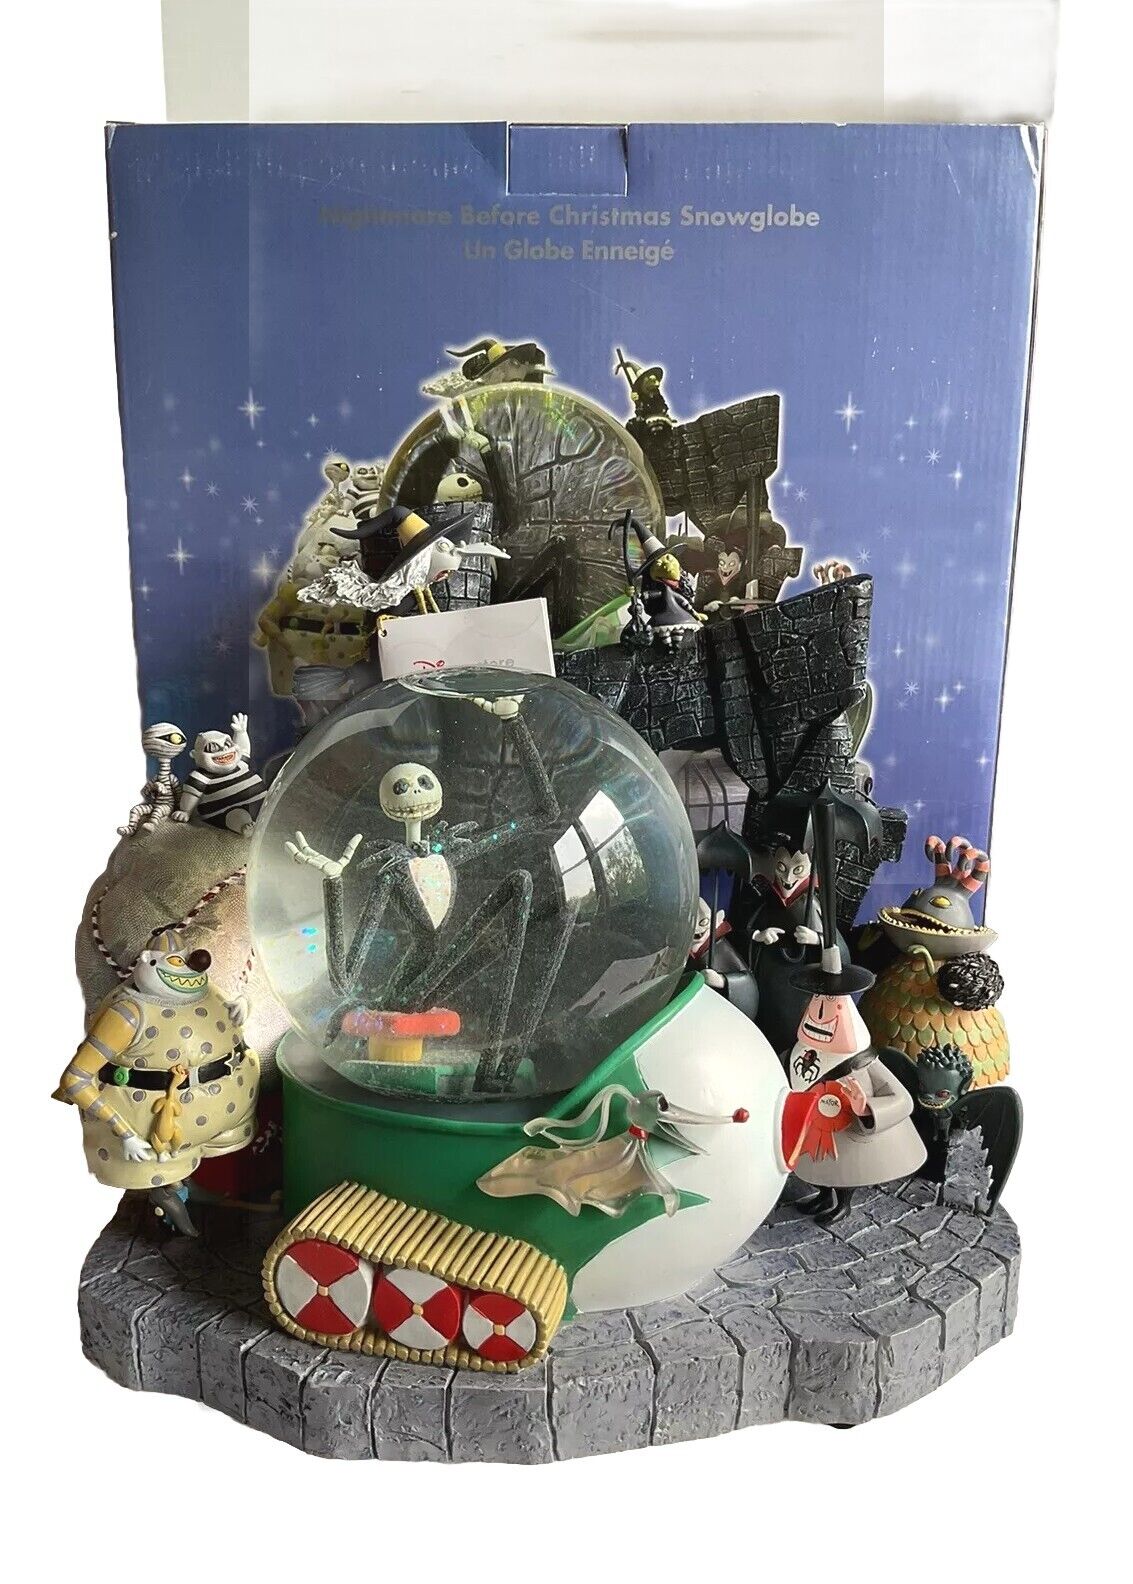 Disney Nightmare Before Christmas Snowglobe 1993 Vintage Collectible 